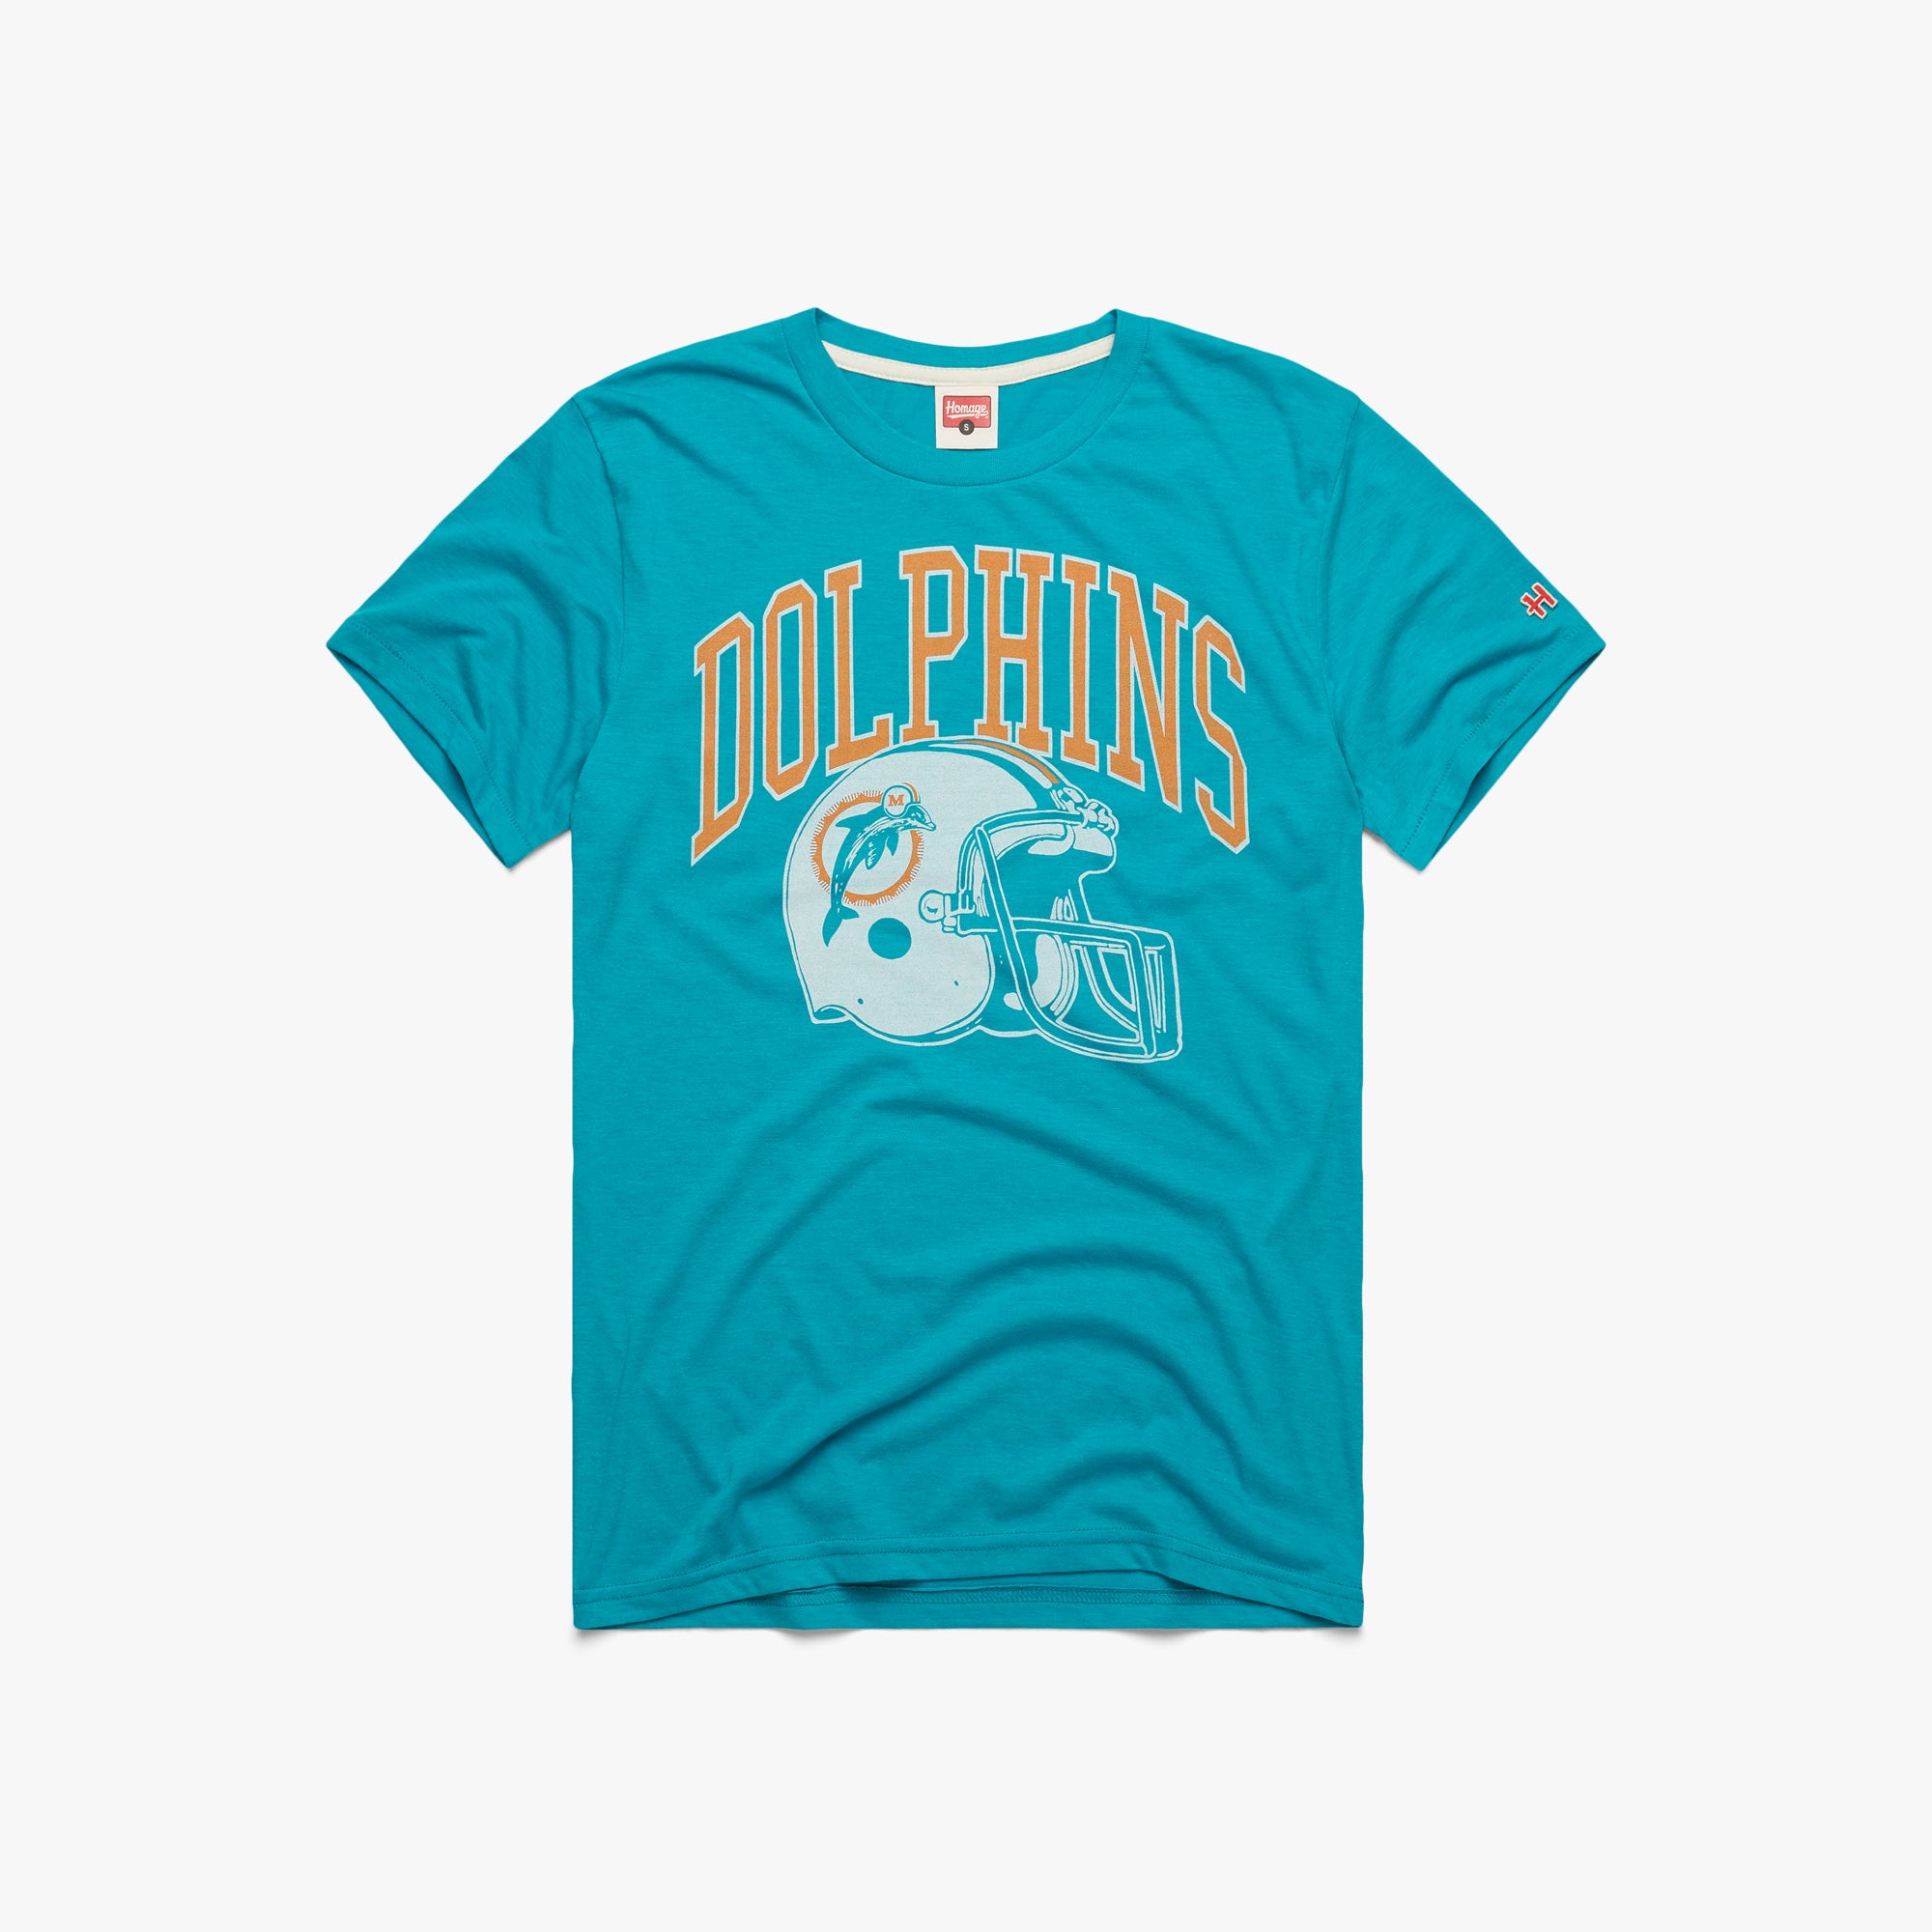 Miami Dolphins Helmet Retro T-Shirt from Homage. | Officially Licensed Vintage NFL Apparel from Homage Pro Shop.